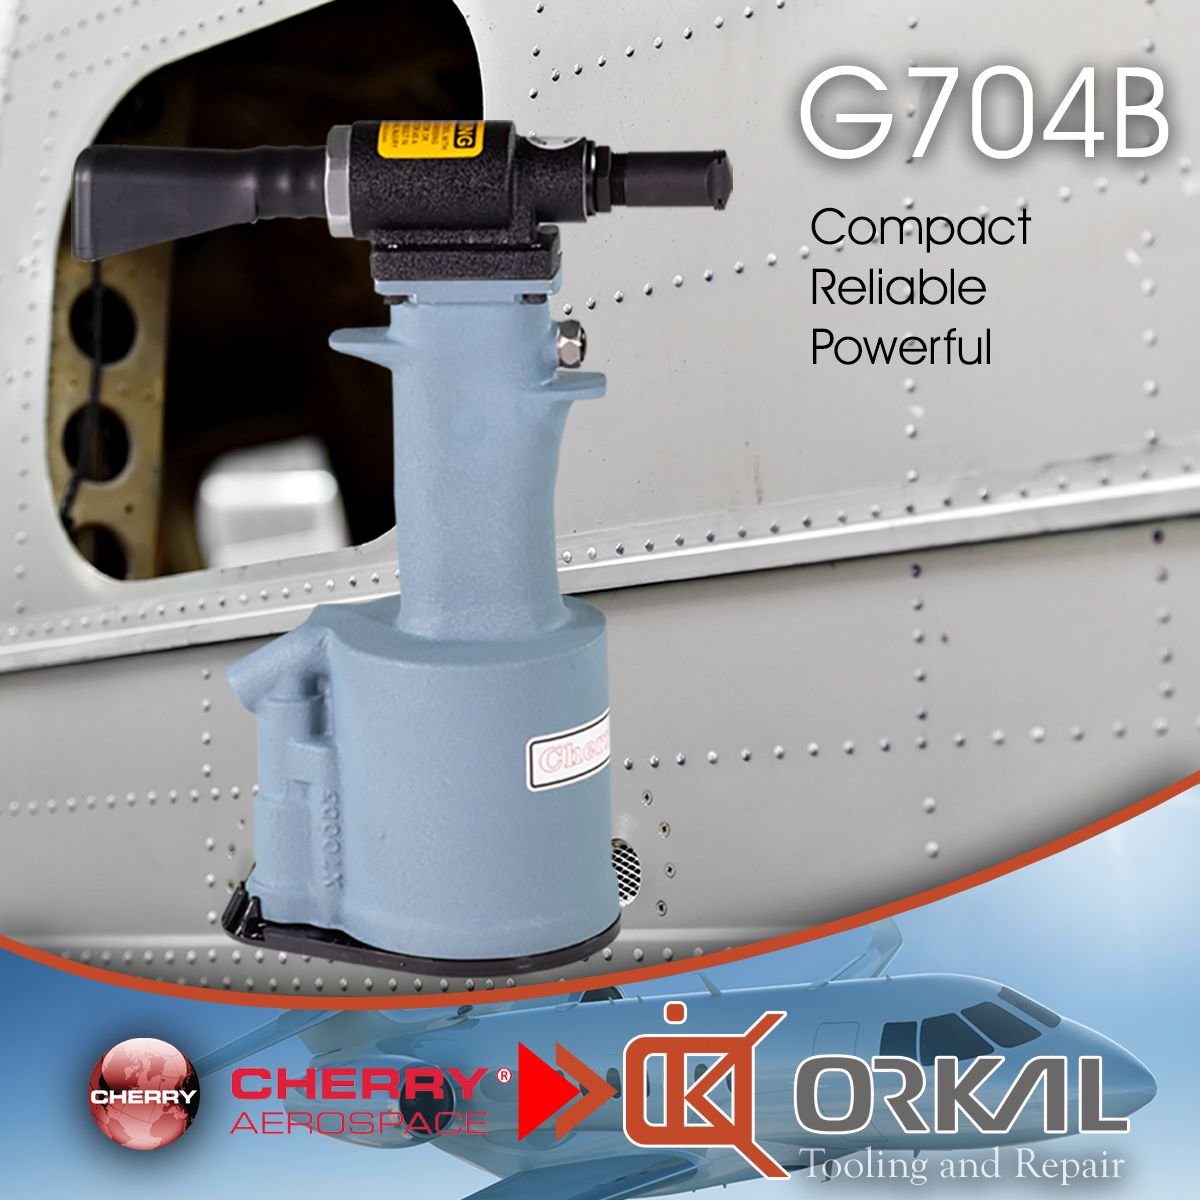 orkal, photograph of the cherry g704b riveter beside an aircraft fuselage. "g704b: compact, reliable, powerful." featuring orkal industries: aerospace quality fittings & tooling solutions.